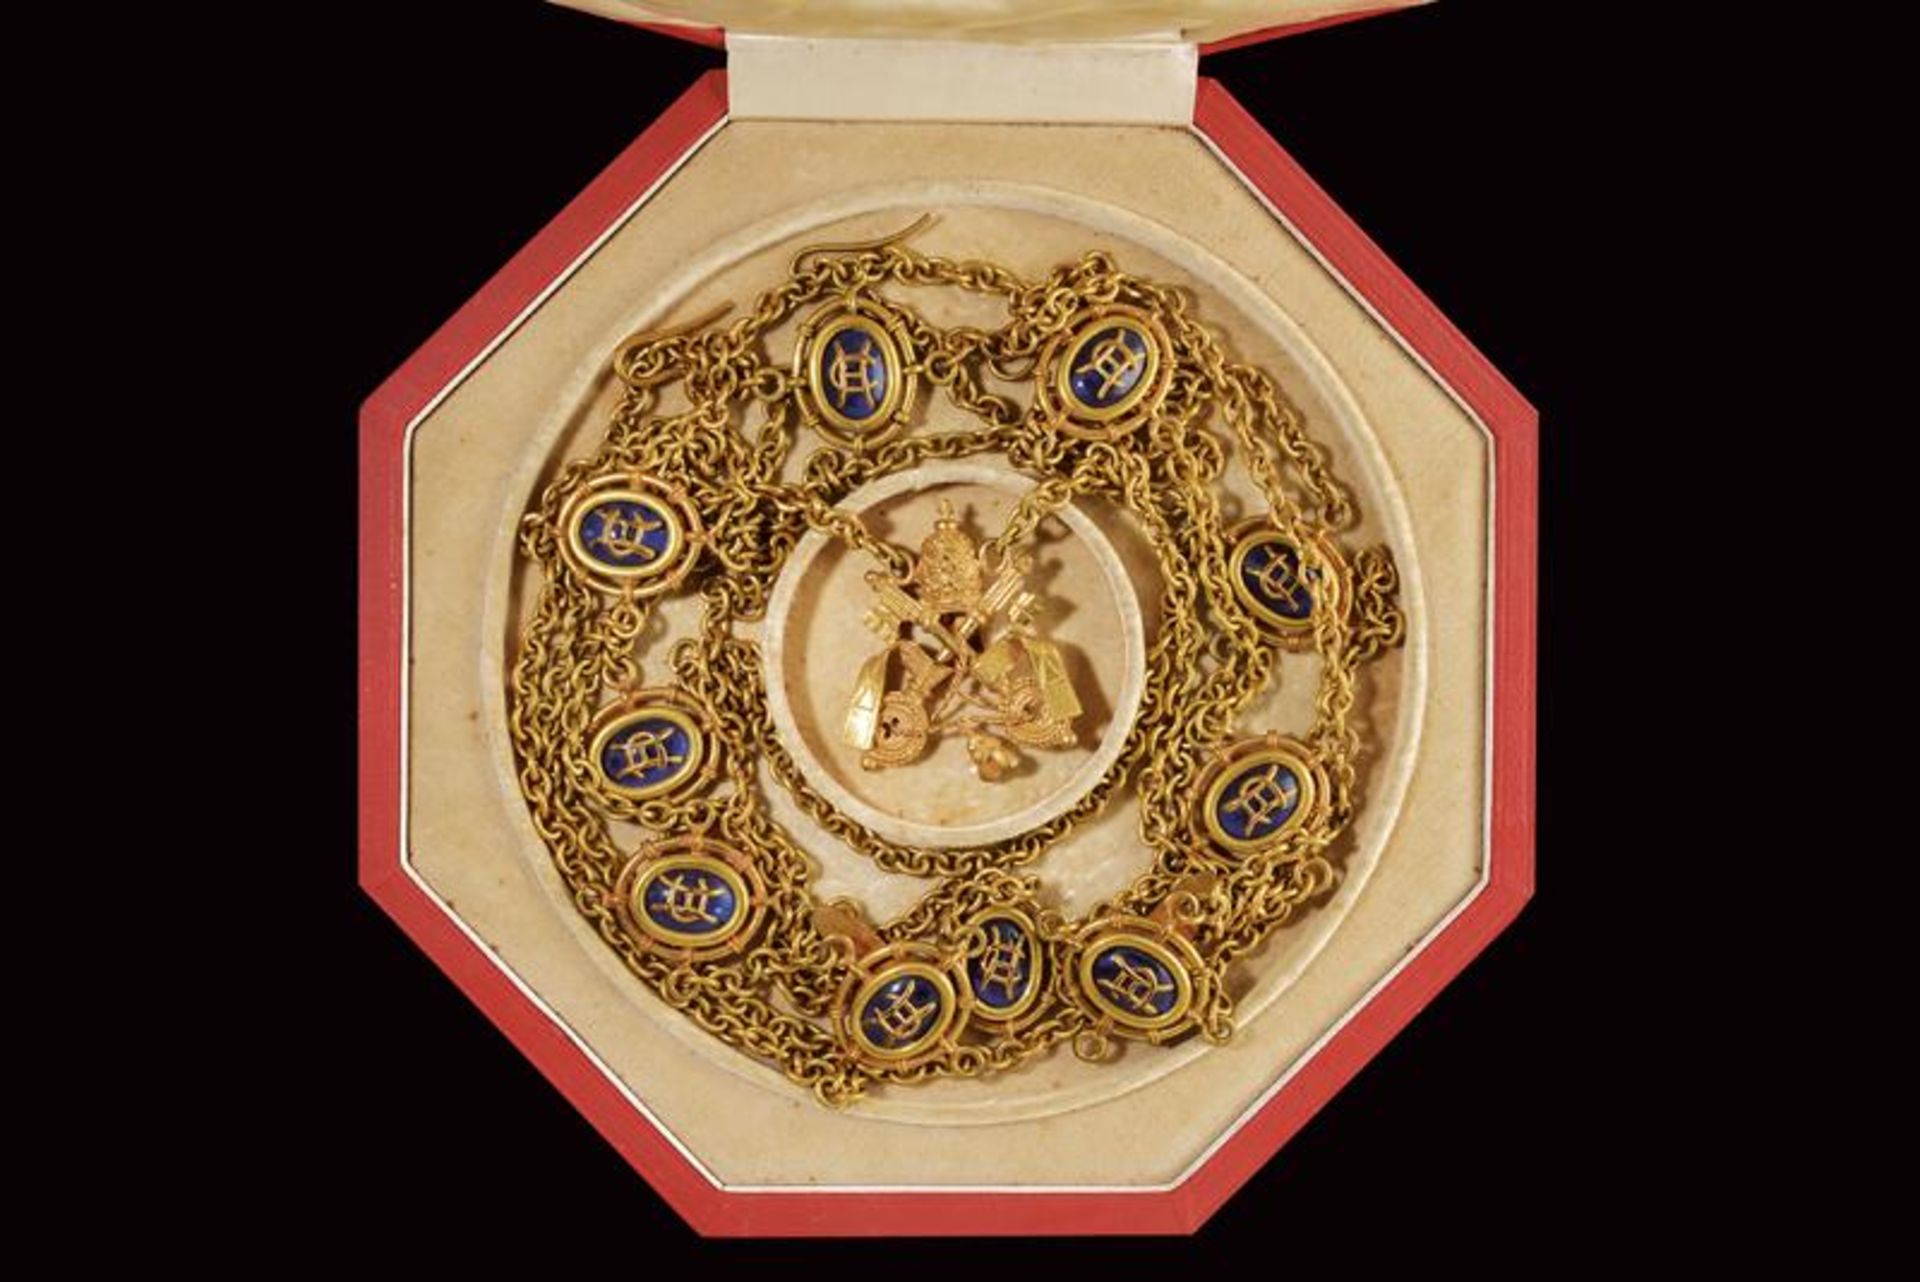 A Papal gentleman's collar from Pope Benedict XV's time